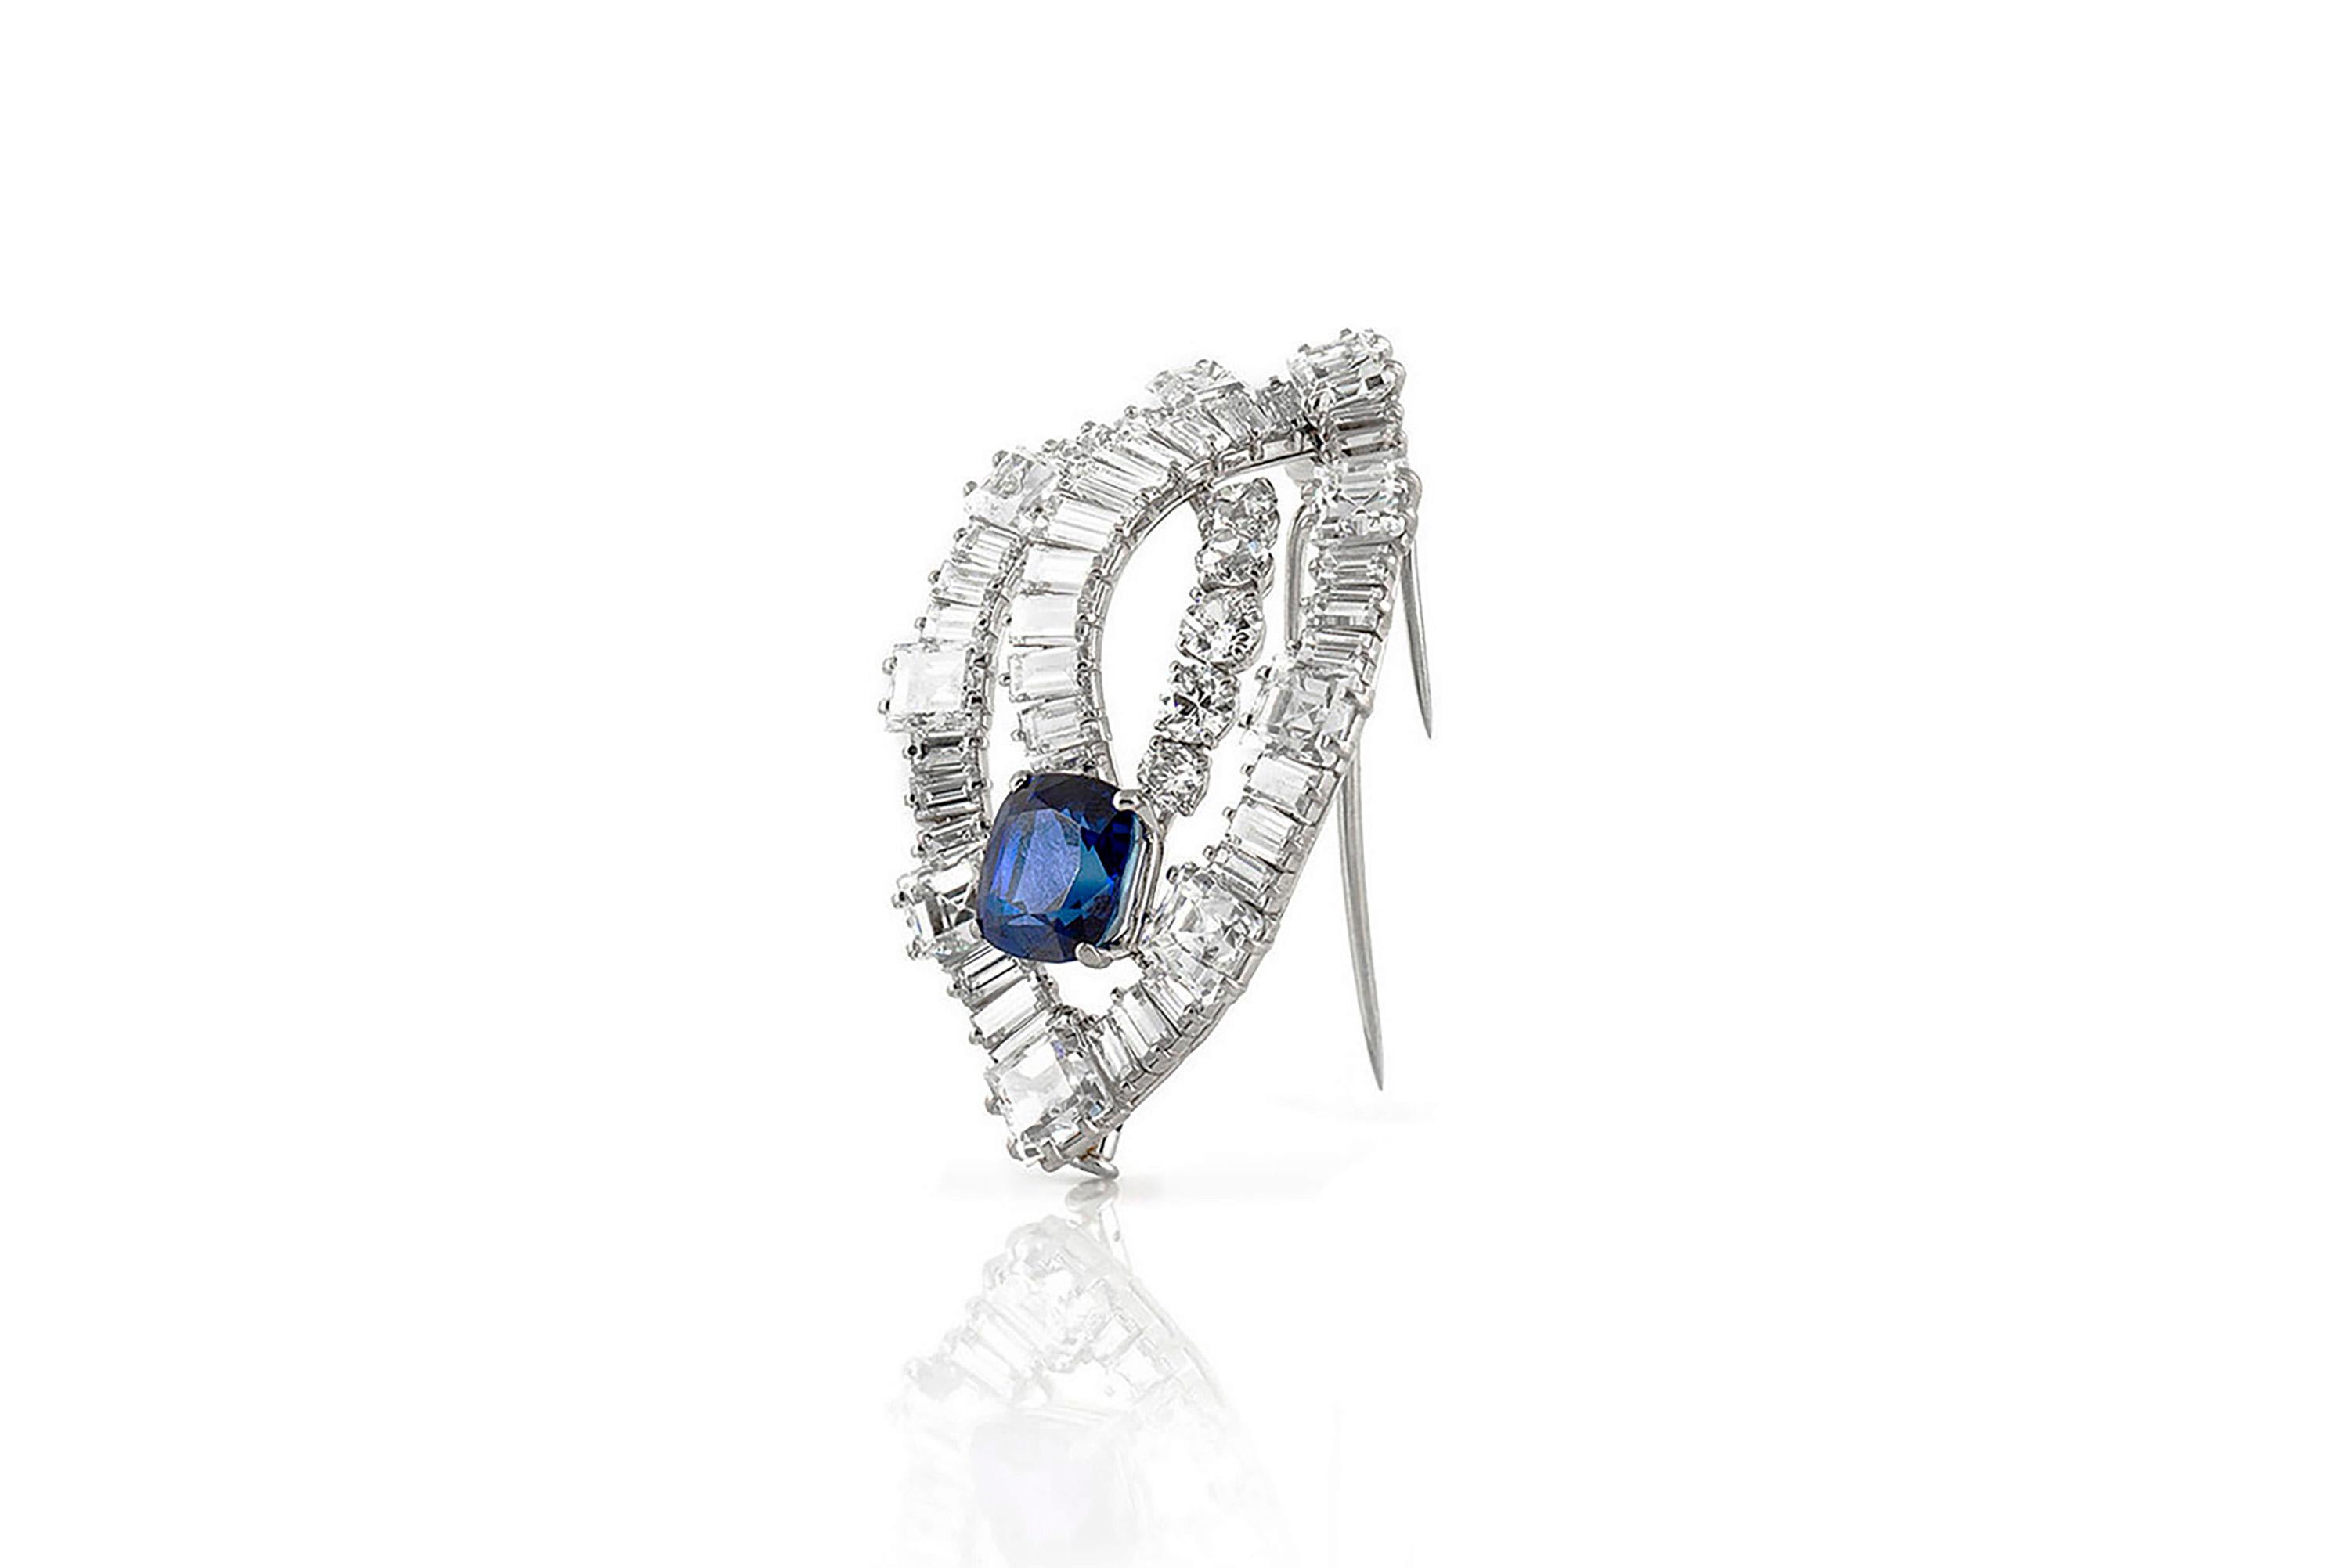 Exquisite Cartier Brooch from 1950's, finely crafted in platinum with natural, cushion cut, Burmese sapphire weighing 7.64 carat with no indications of heat treatment. The center Sapphire is surrounded by baguette, square and round brilliant cut